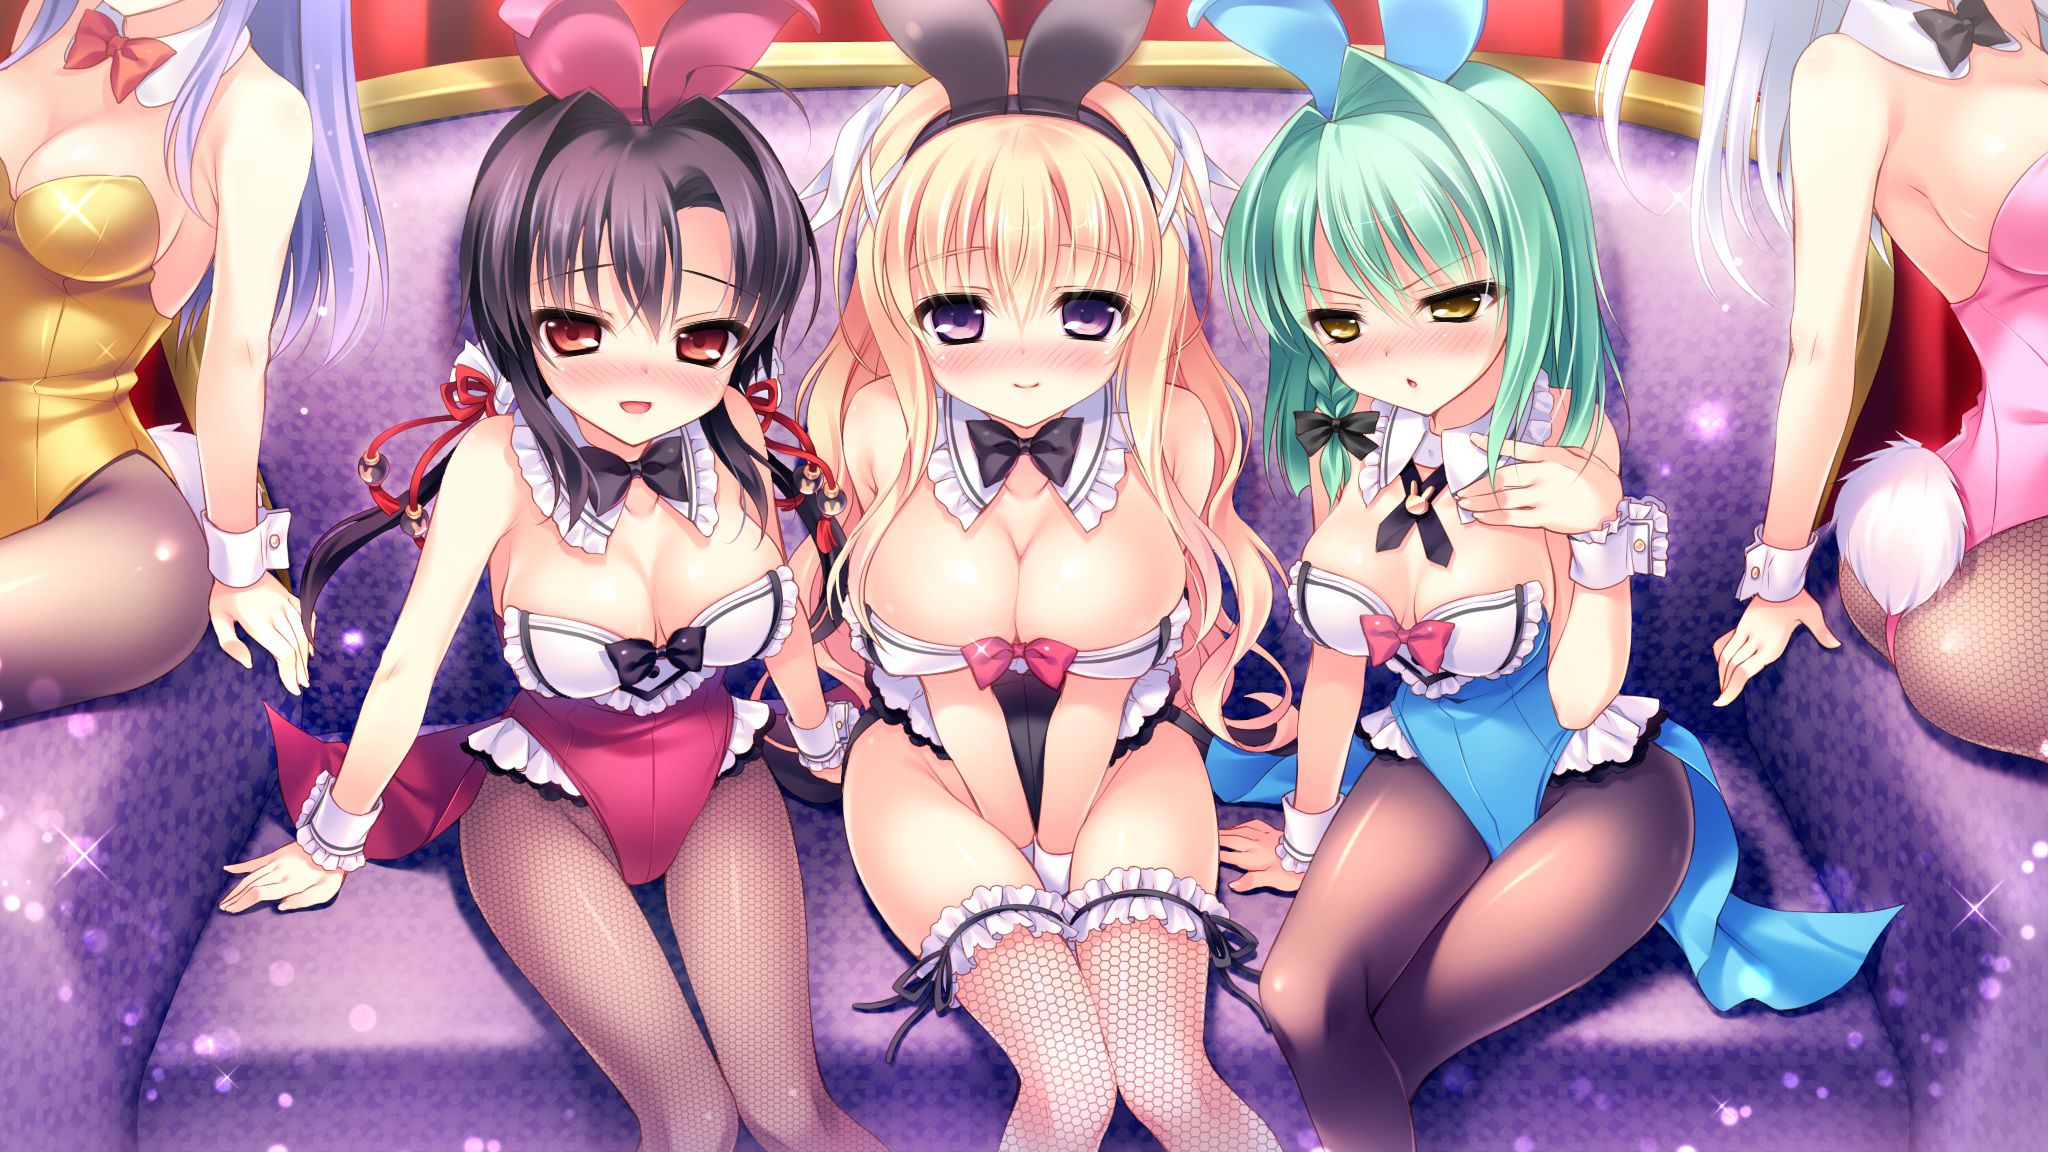 Bunny Paradise carried on from [under age 18 prohibited eroge HCG] erotic pictures part 1 8